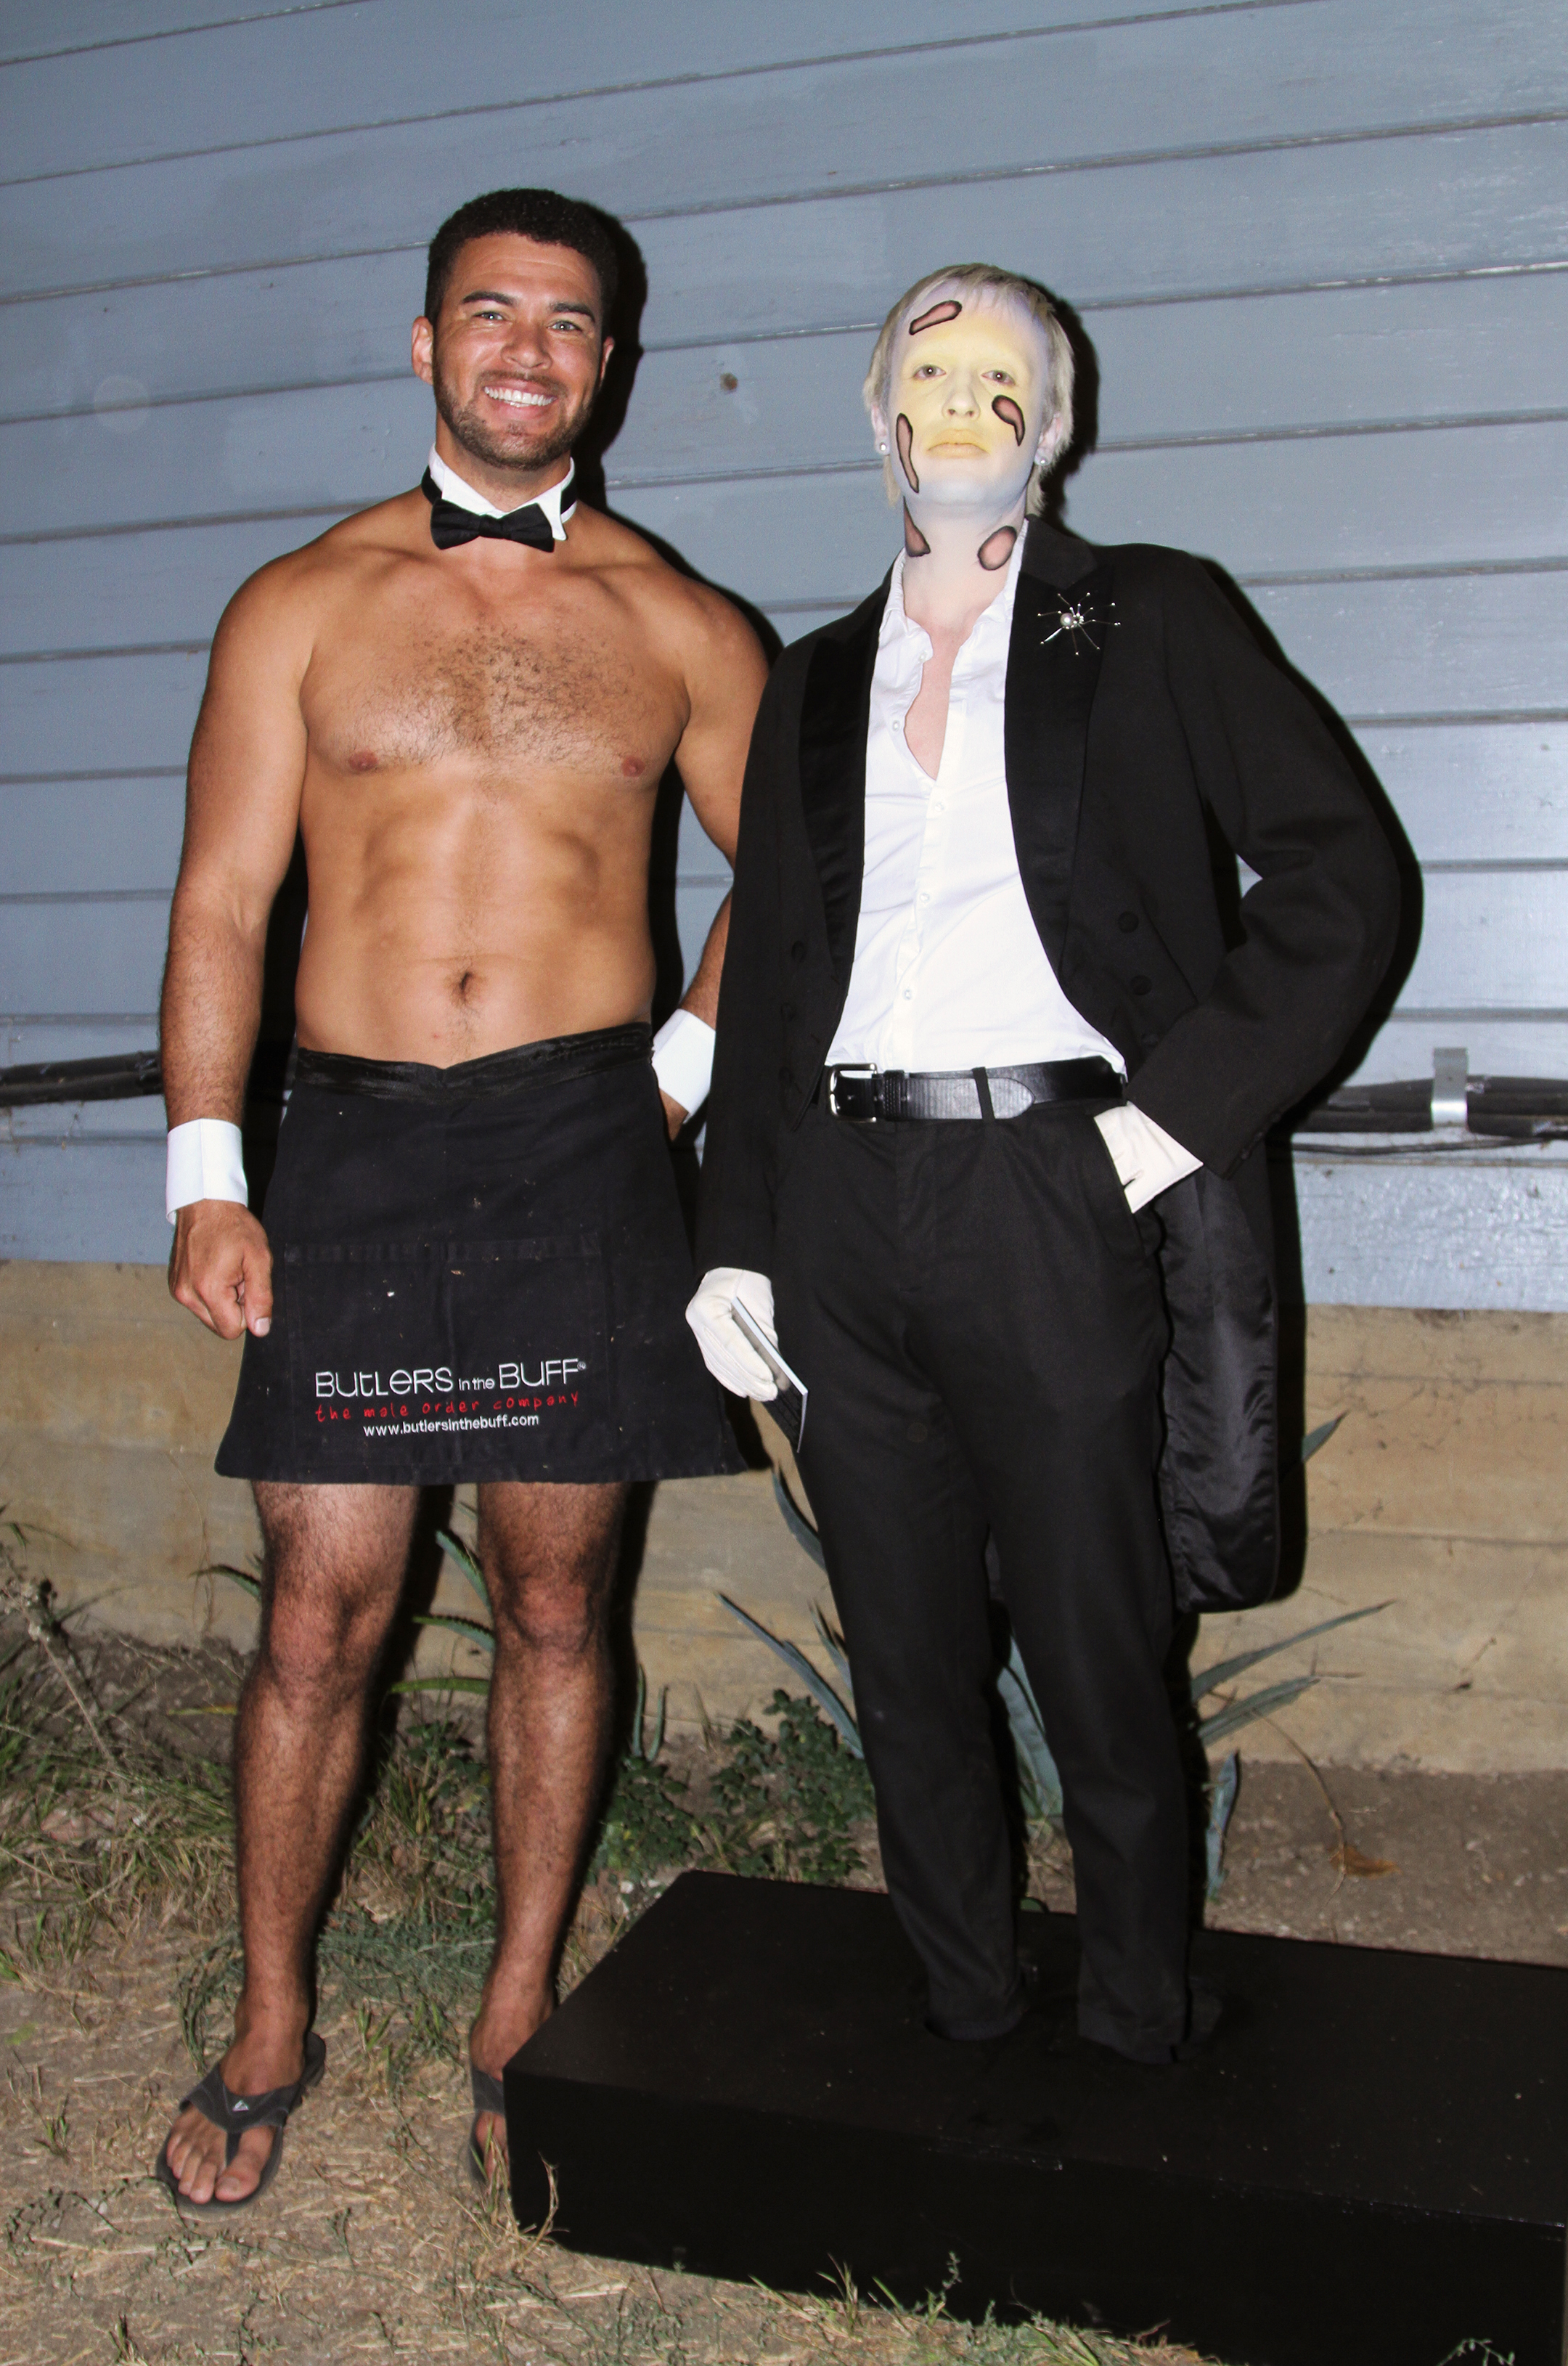 Jesse in facepaint standing in a black box around his feet next to a shirtless male butler